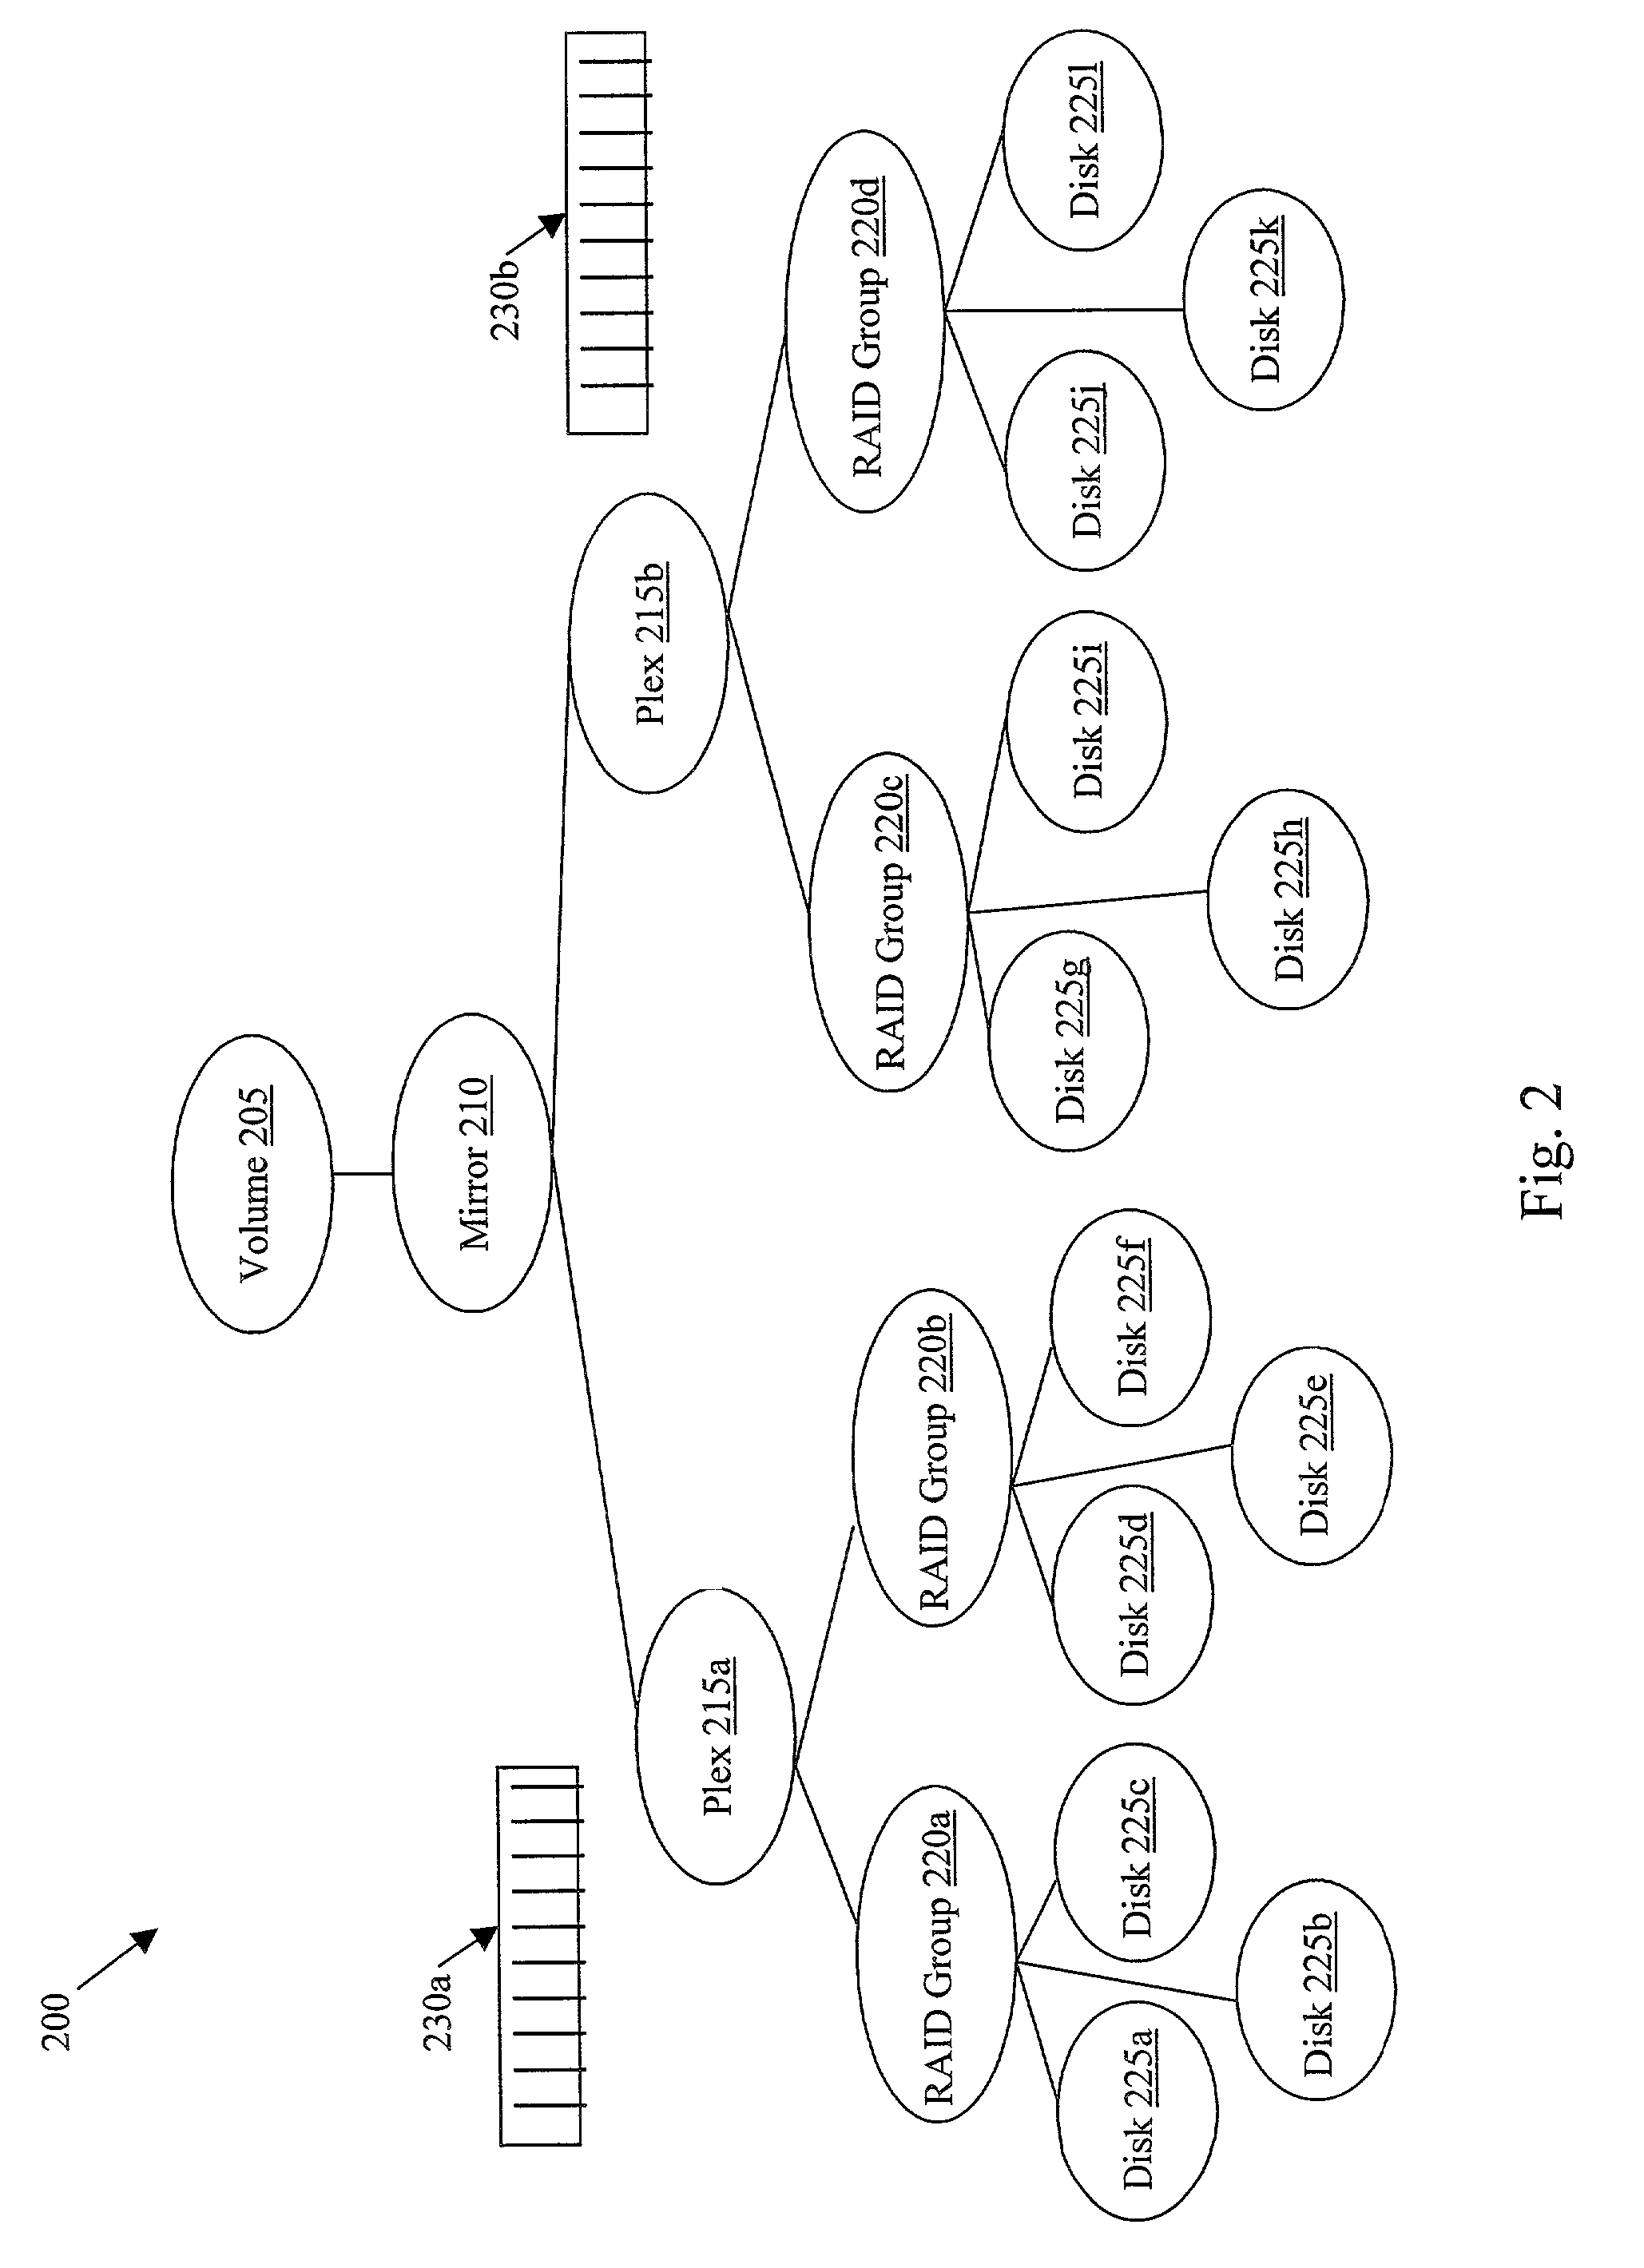 Method and apparatus for decomposing I/O tasks in a raid system